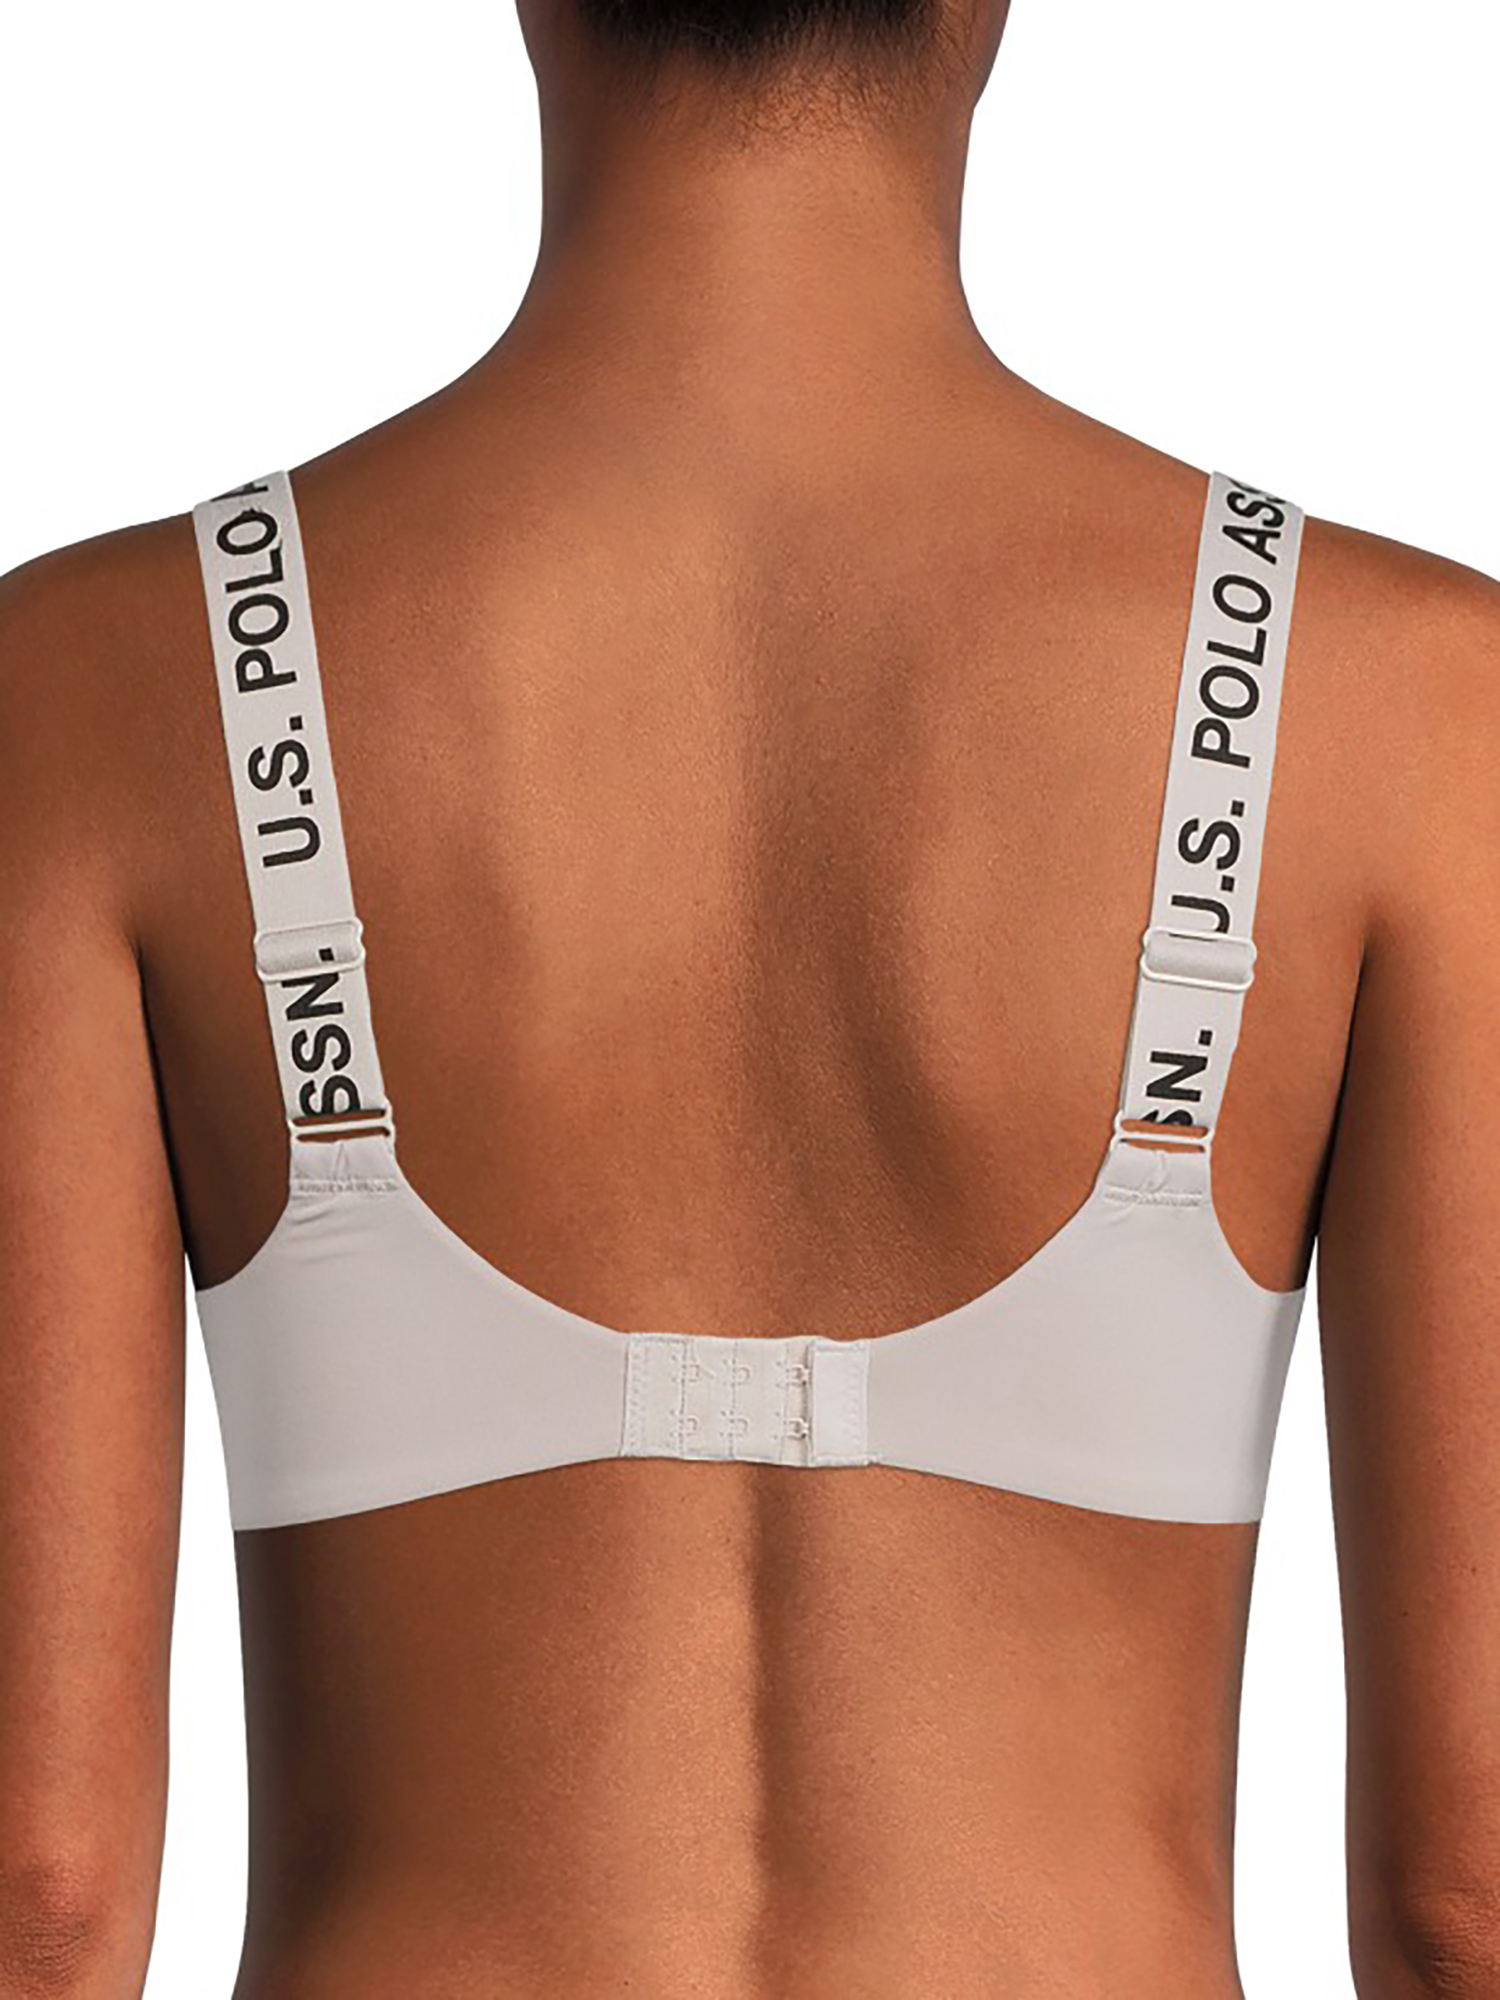 U.S. Polo Assn. Women's 2 Pack Tag-Free Microfiber Push Up Wire Free Bra Set - image 3 of 3